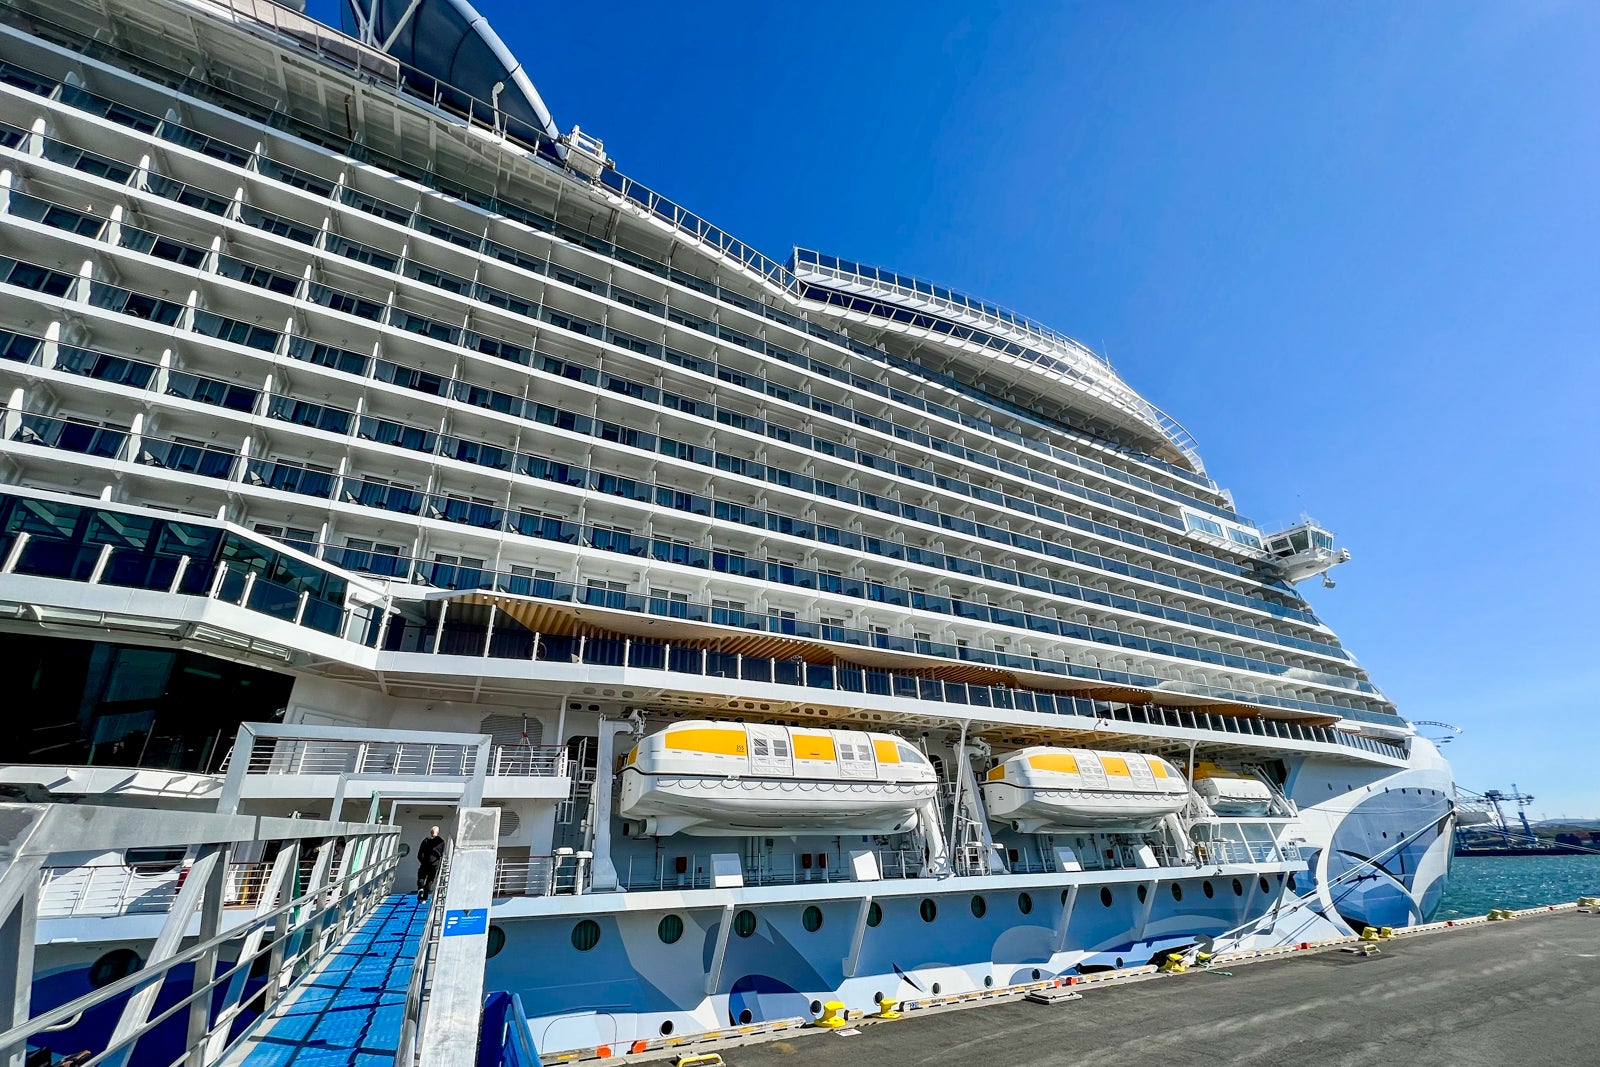 You are currently viewing The 5 best destinations you can visit on a Norwegian Cruise Line ship